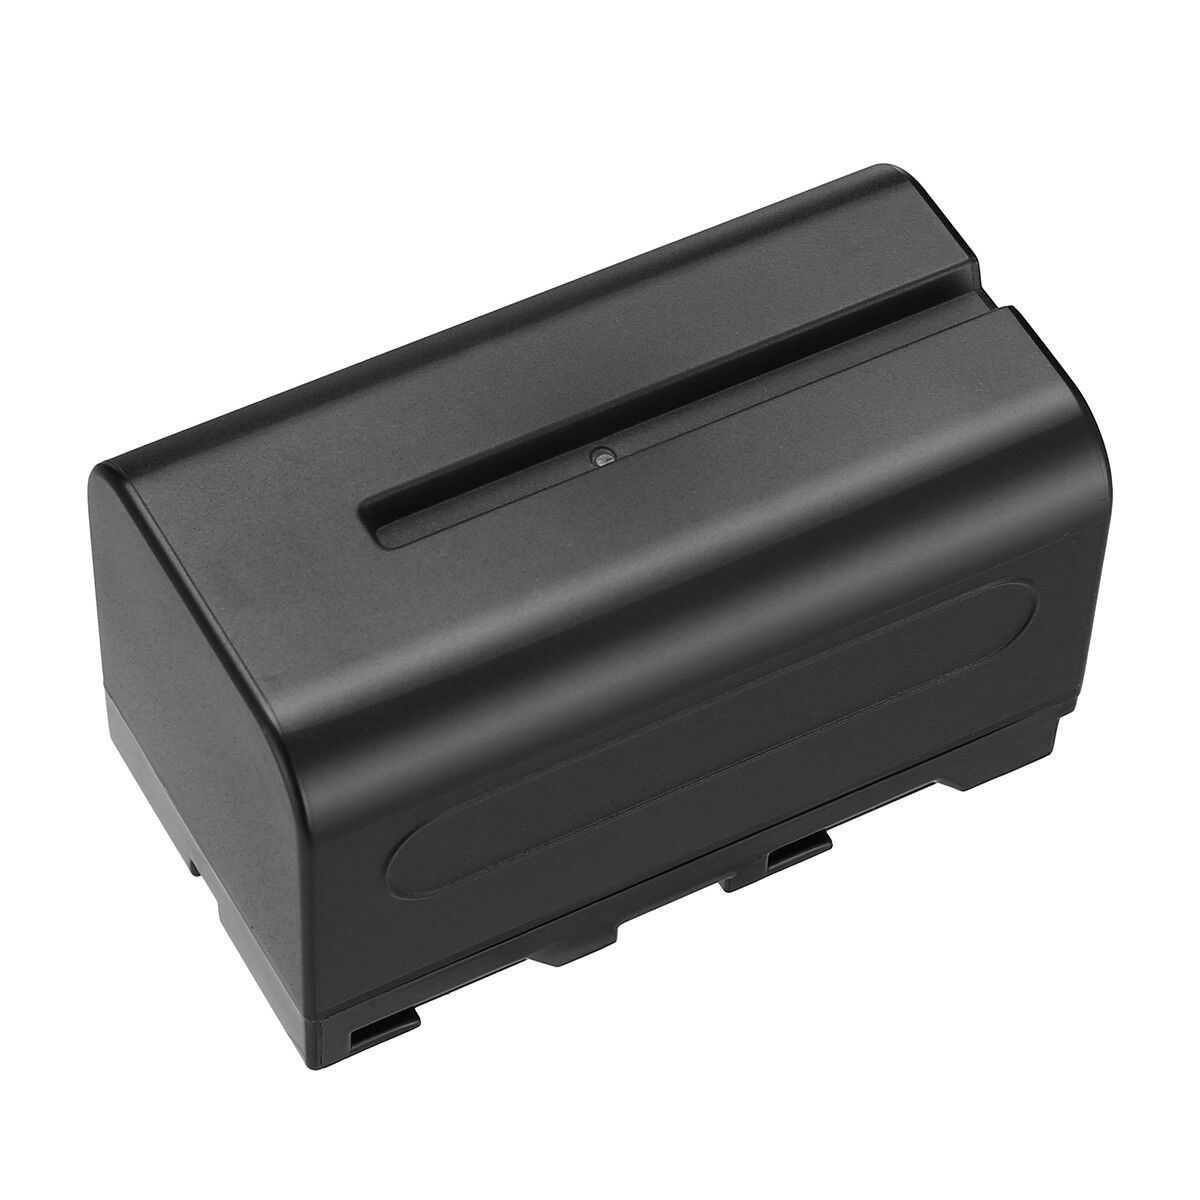 NP-F750 Replacement Battery and Battery Charger For Sony